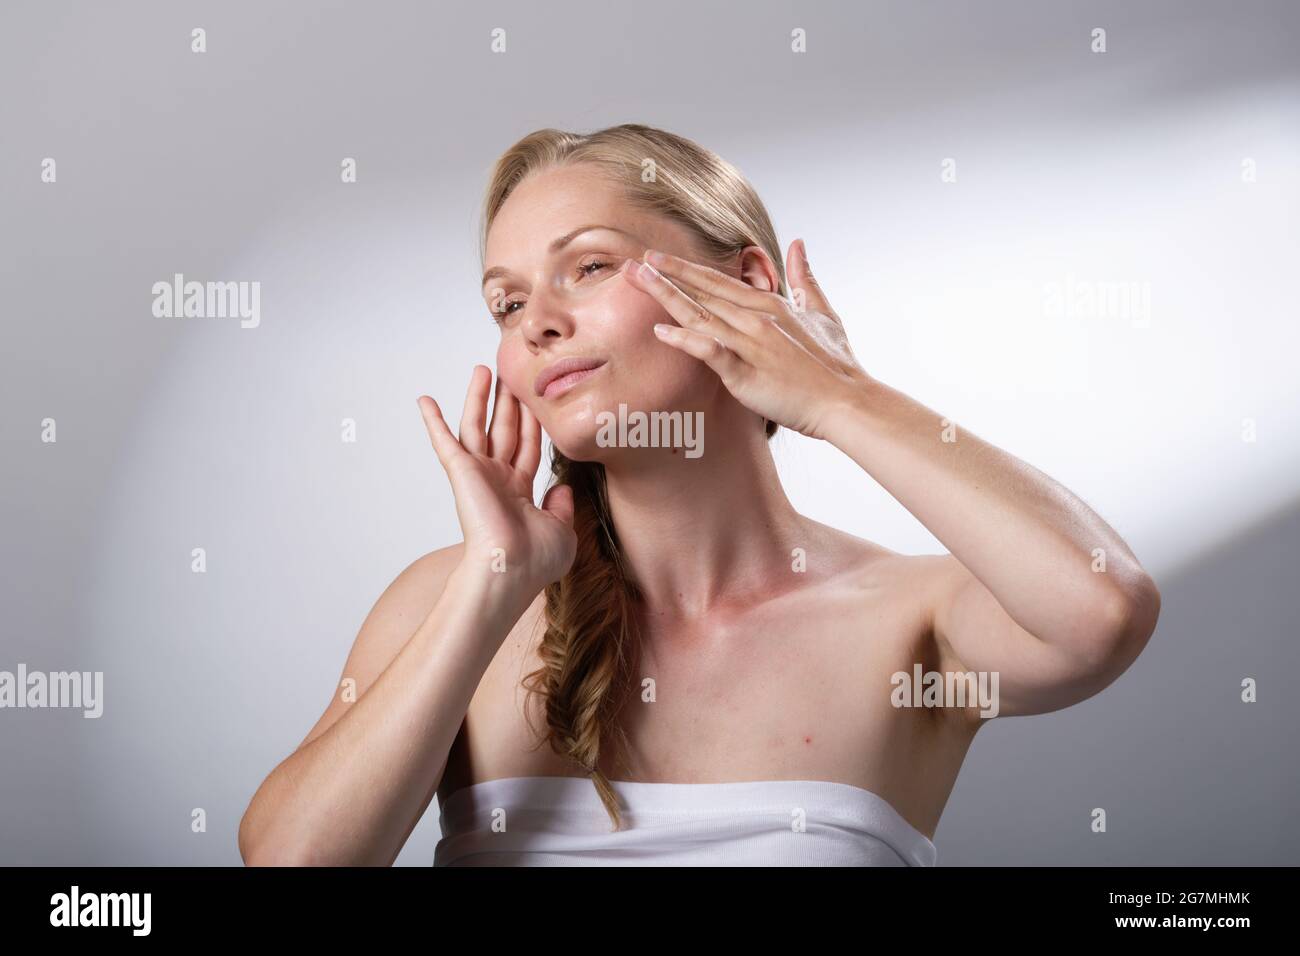 Beauty treatment regime by using hands and fingers to gently massage the face. Calm and relaxation. Me time. Stock Photo